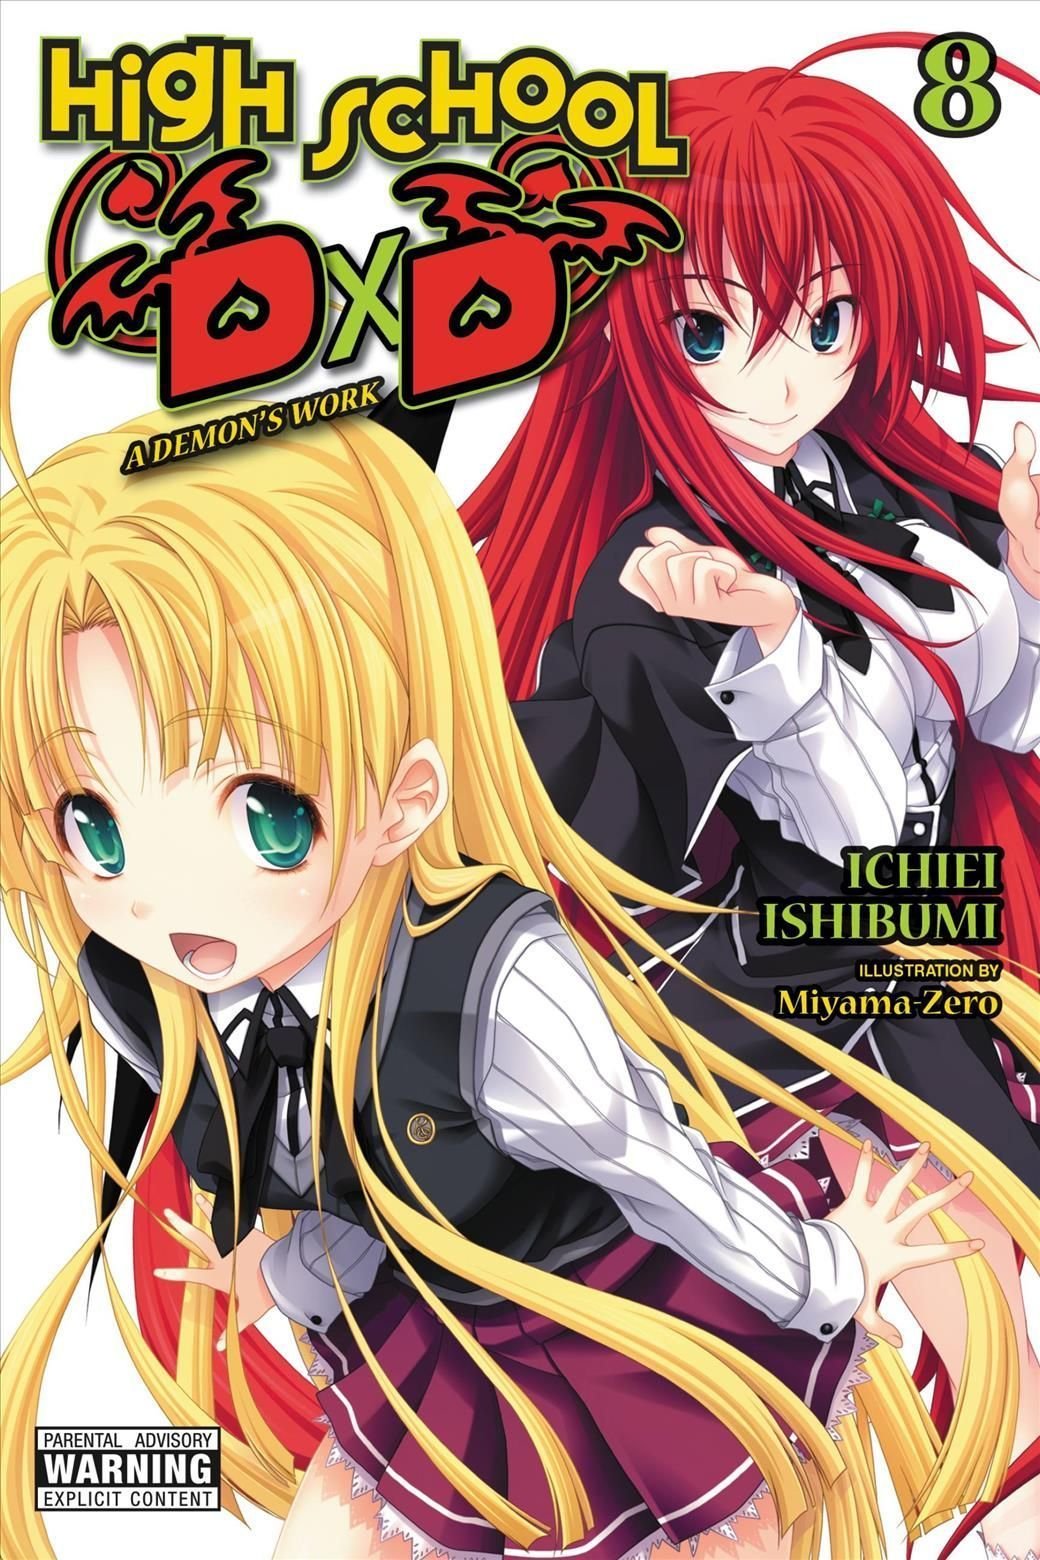 Sorry for the wait, gentlemen! New game High School DxD Operation